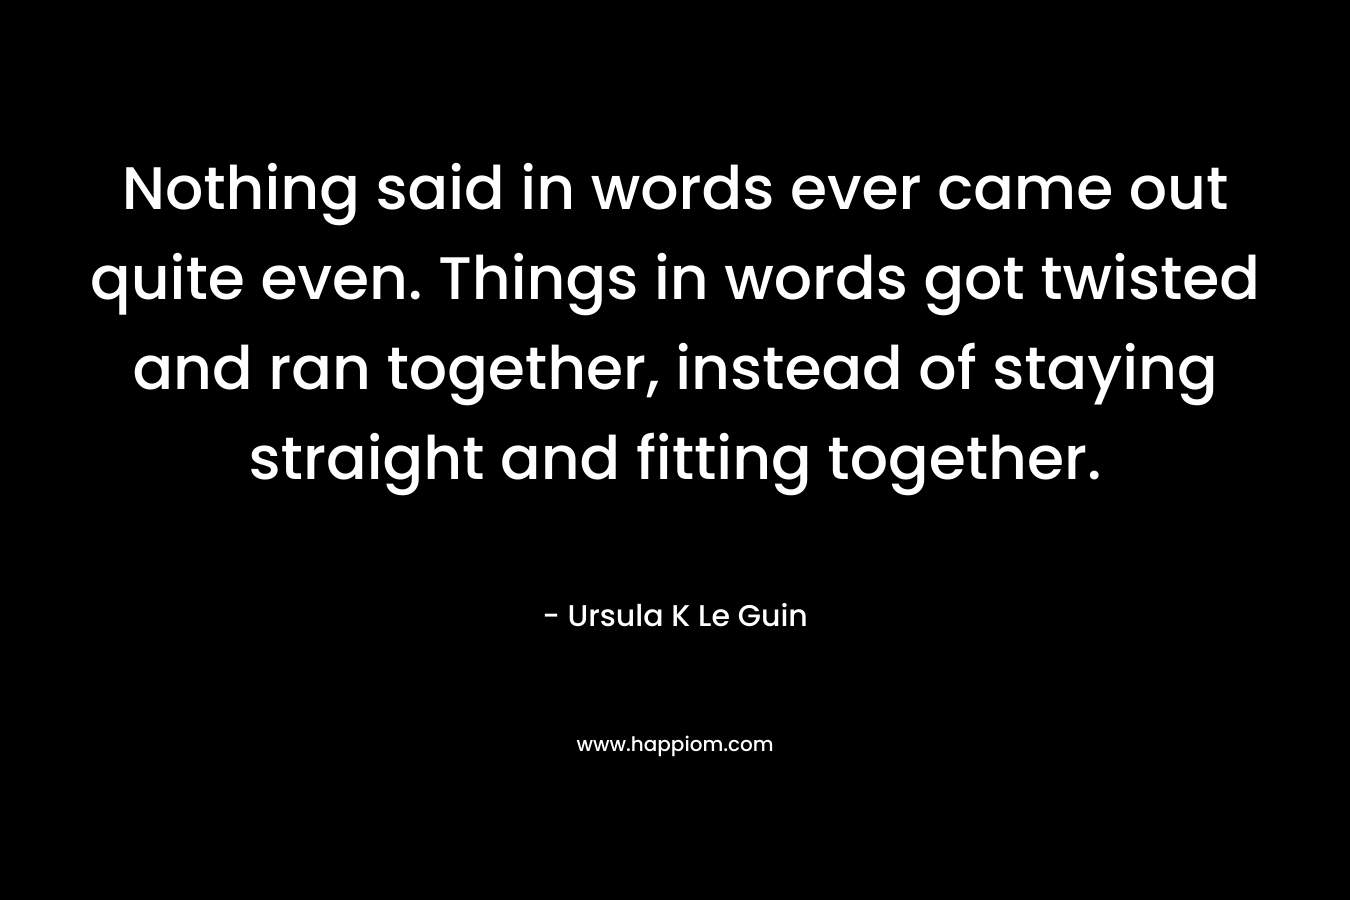 Nothing said in words ever came out quite even. Things in words got twisted and ran together, instead of staying straight and fitting together. – Ursula K Le Guin